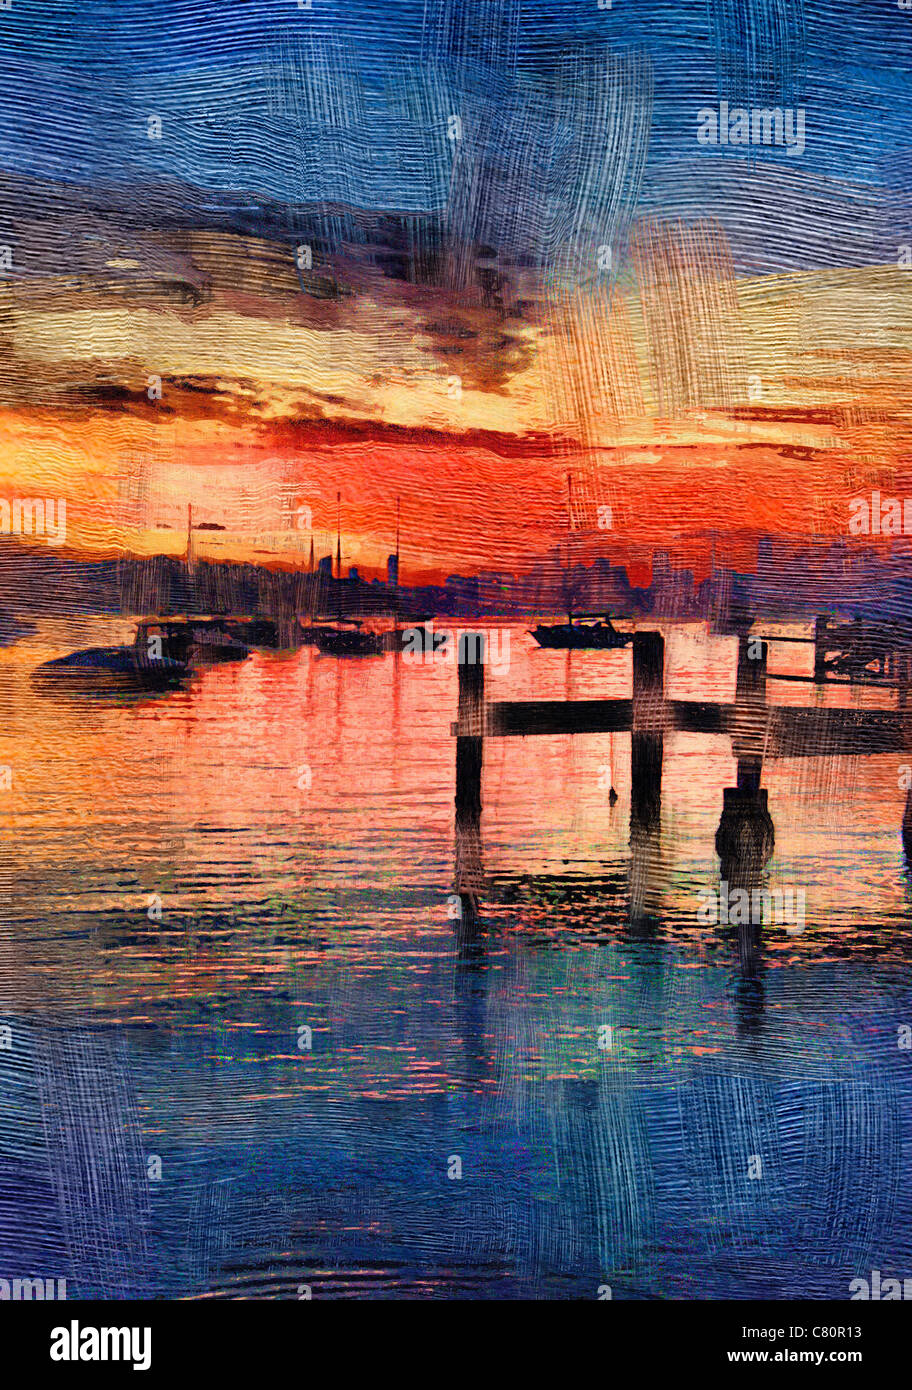 Digital illustration high impact color cityscape with water boats and reflections at sunset painting style suitable for decor or Stock Photo